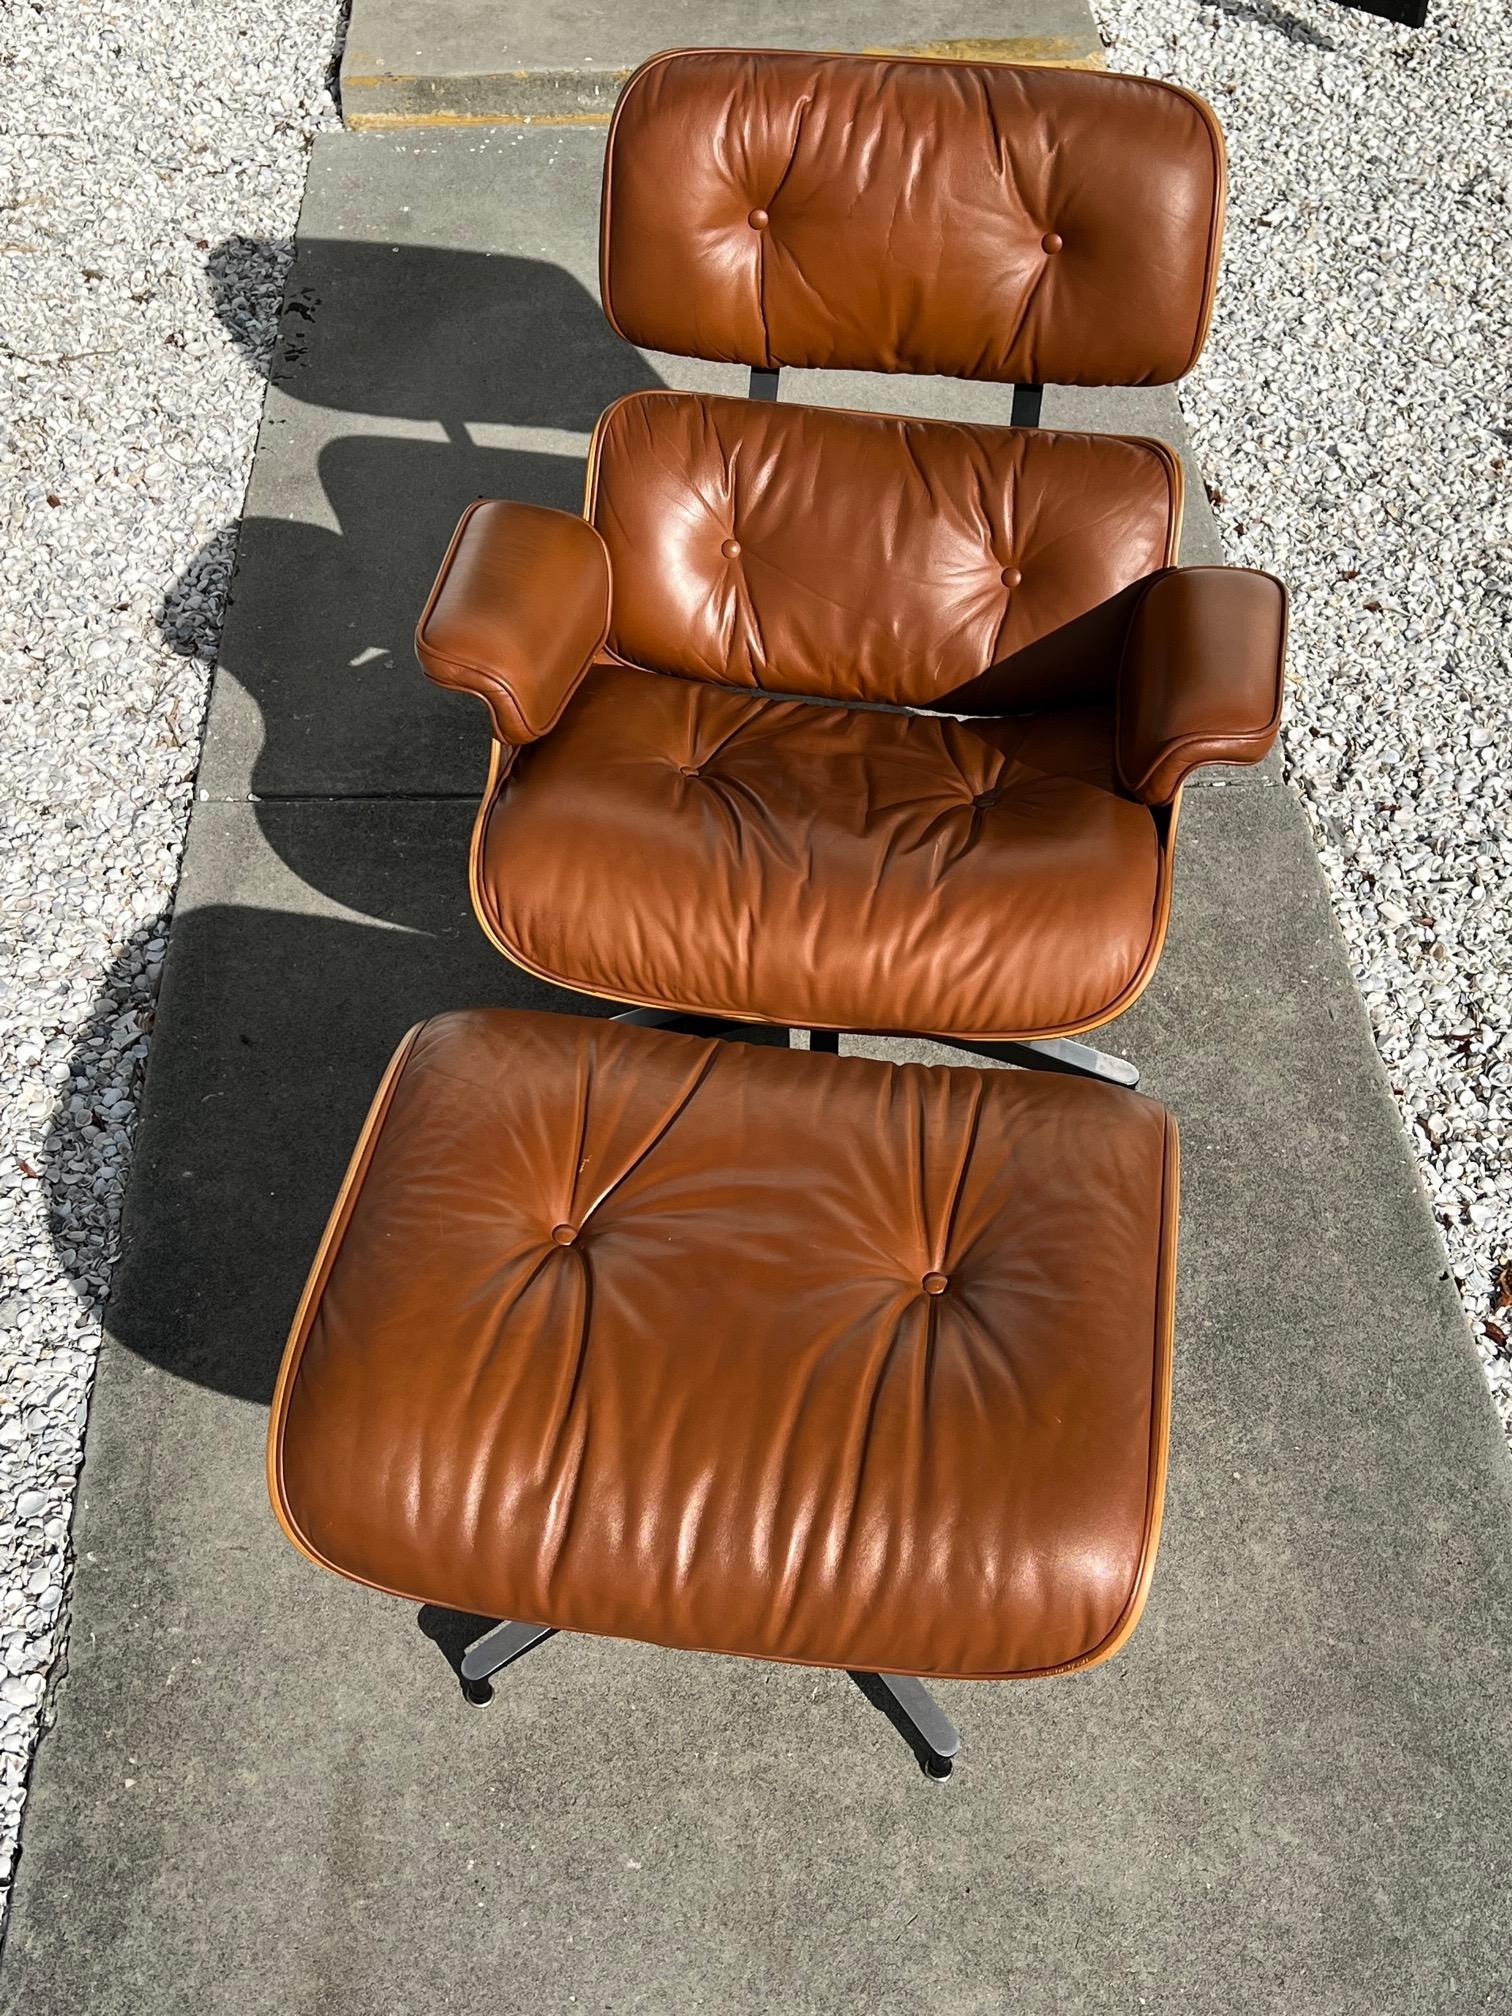 Classic Charles Eames Herman Miller Lounge Chair 1980's Cognac Brown Leather 4